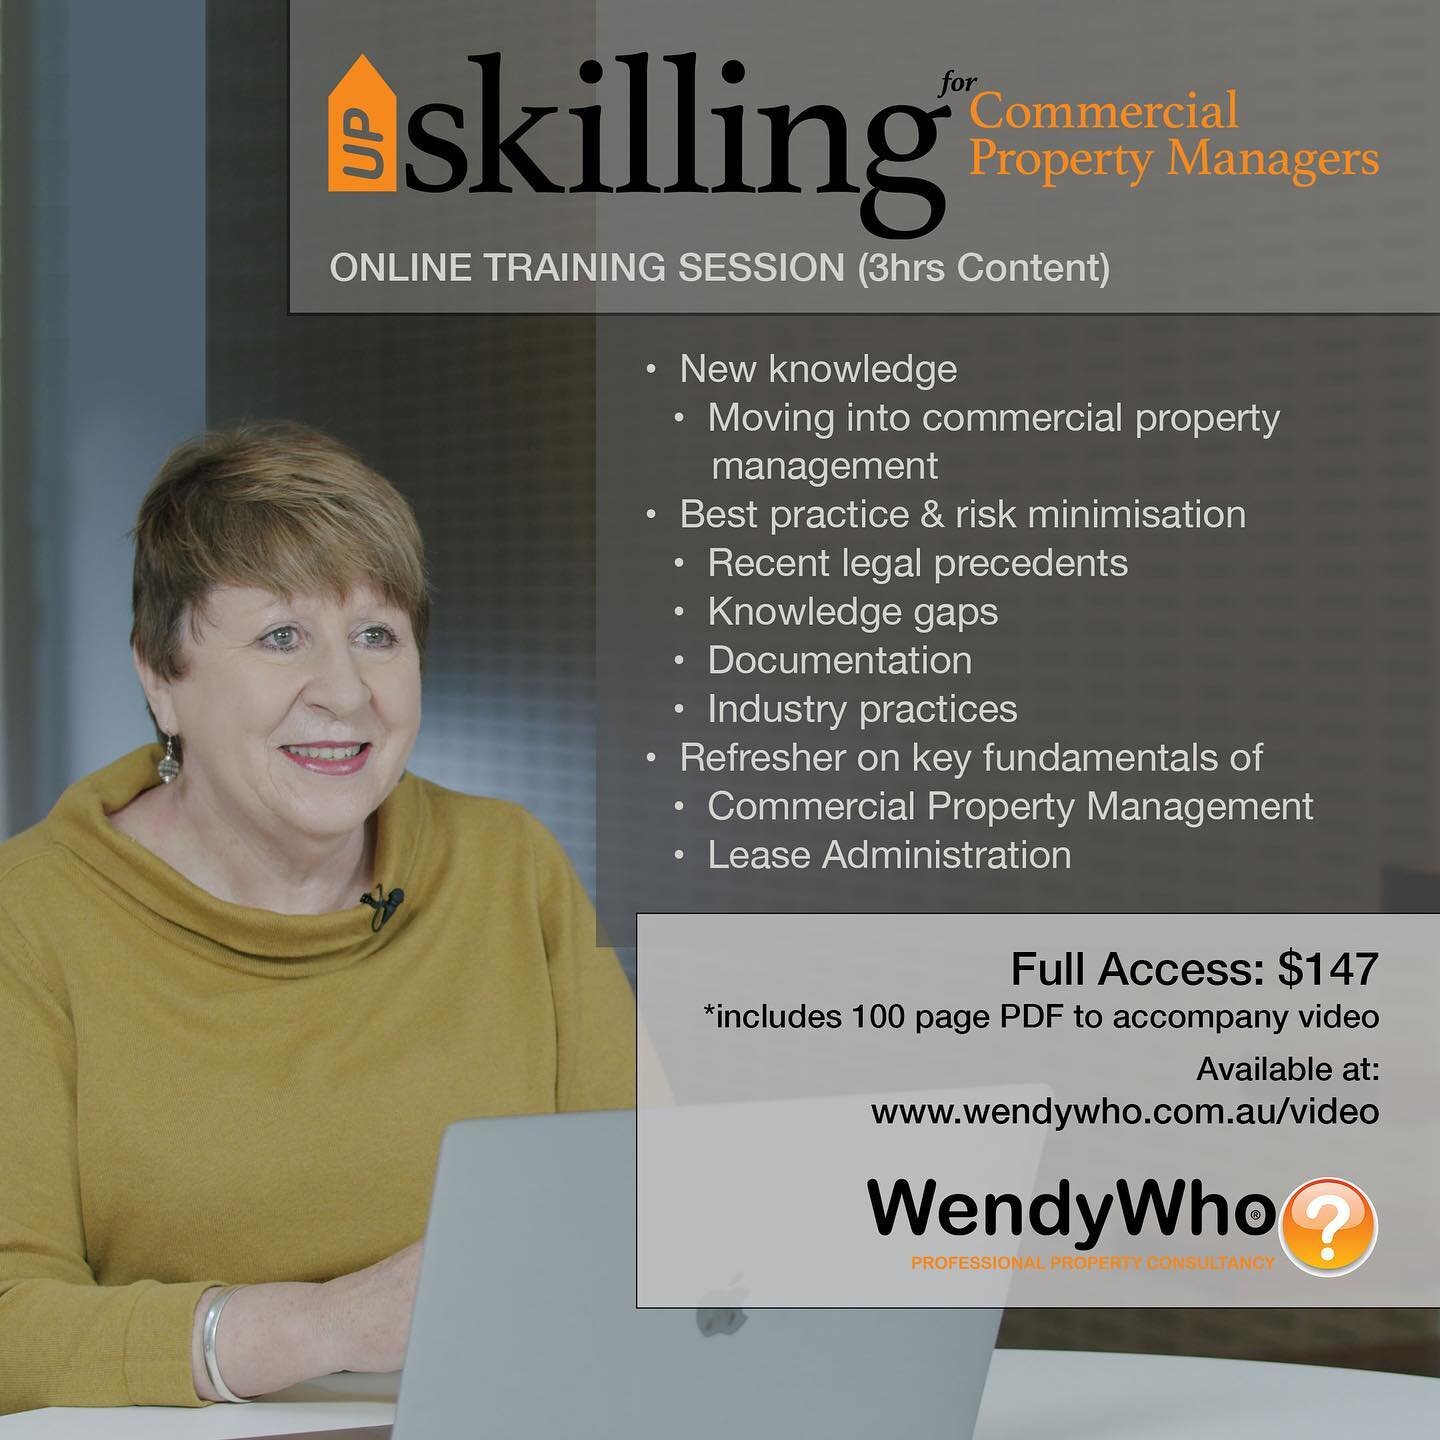 Super excited to present the first of a series of in-house training courses.
Wendy Thomson (aka WendyWho?) takes you through 3 hours of education in the area of Commercial Property Management.
.
We filmed the content prior to lockdown, with a total o